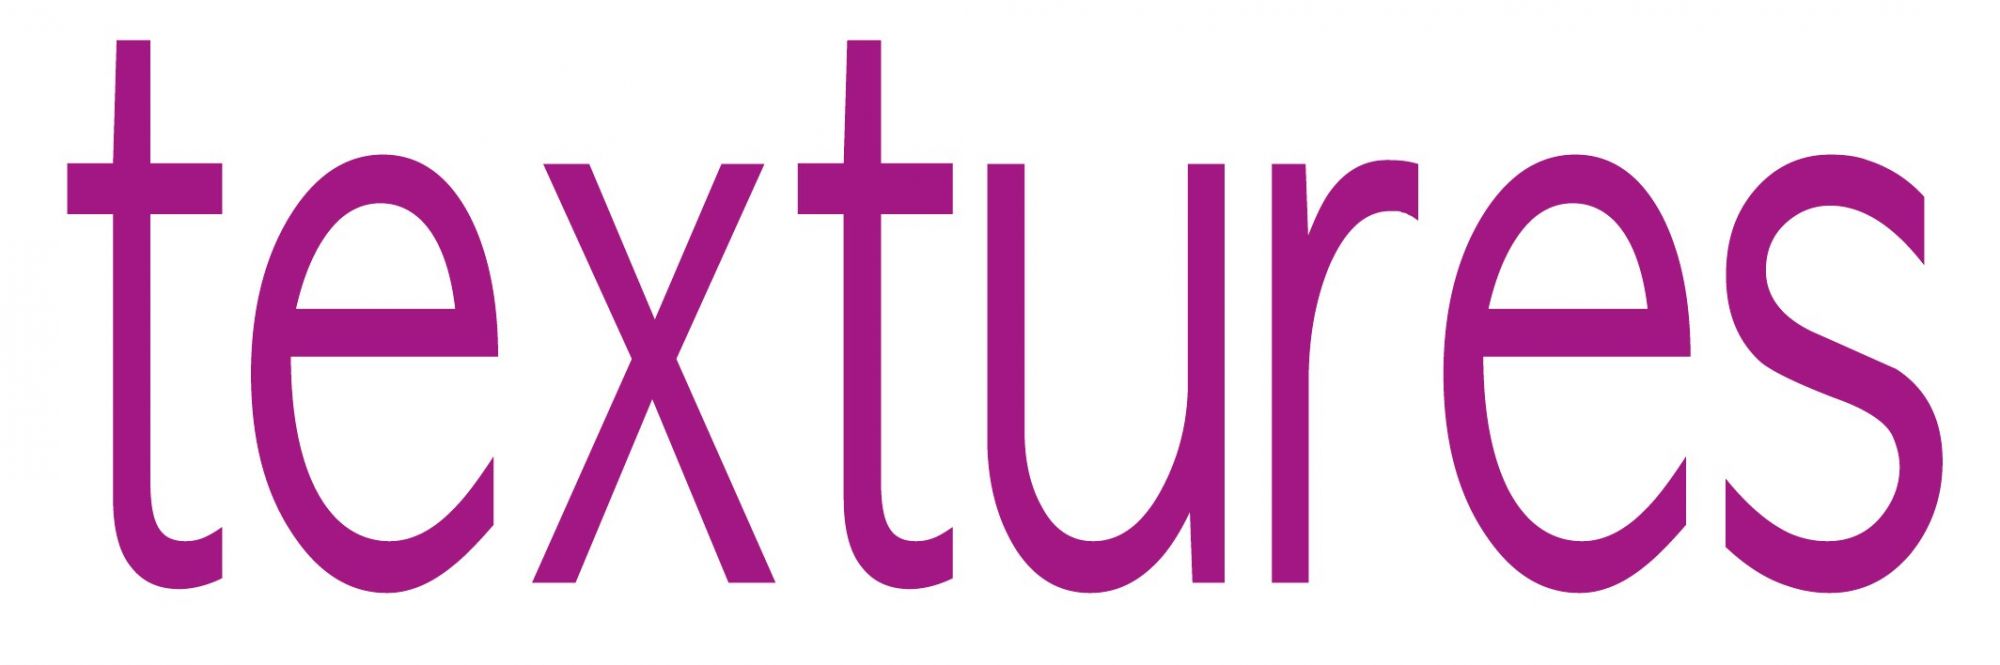 Textures is a quarterly magazine addressed to textiles from yarn to fabric, for furnishing and fashion industry. Interviews, visits to sector events, figures and market data are combined with product reviews and company reports to provide accurate and com